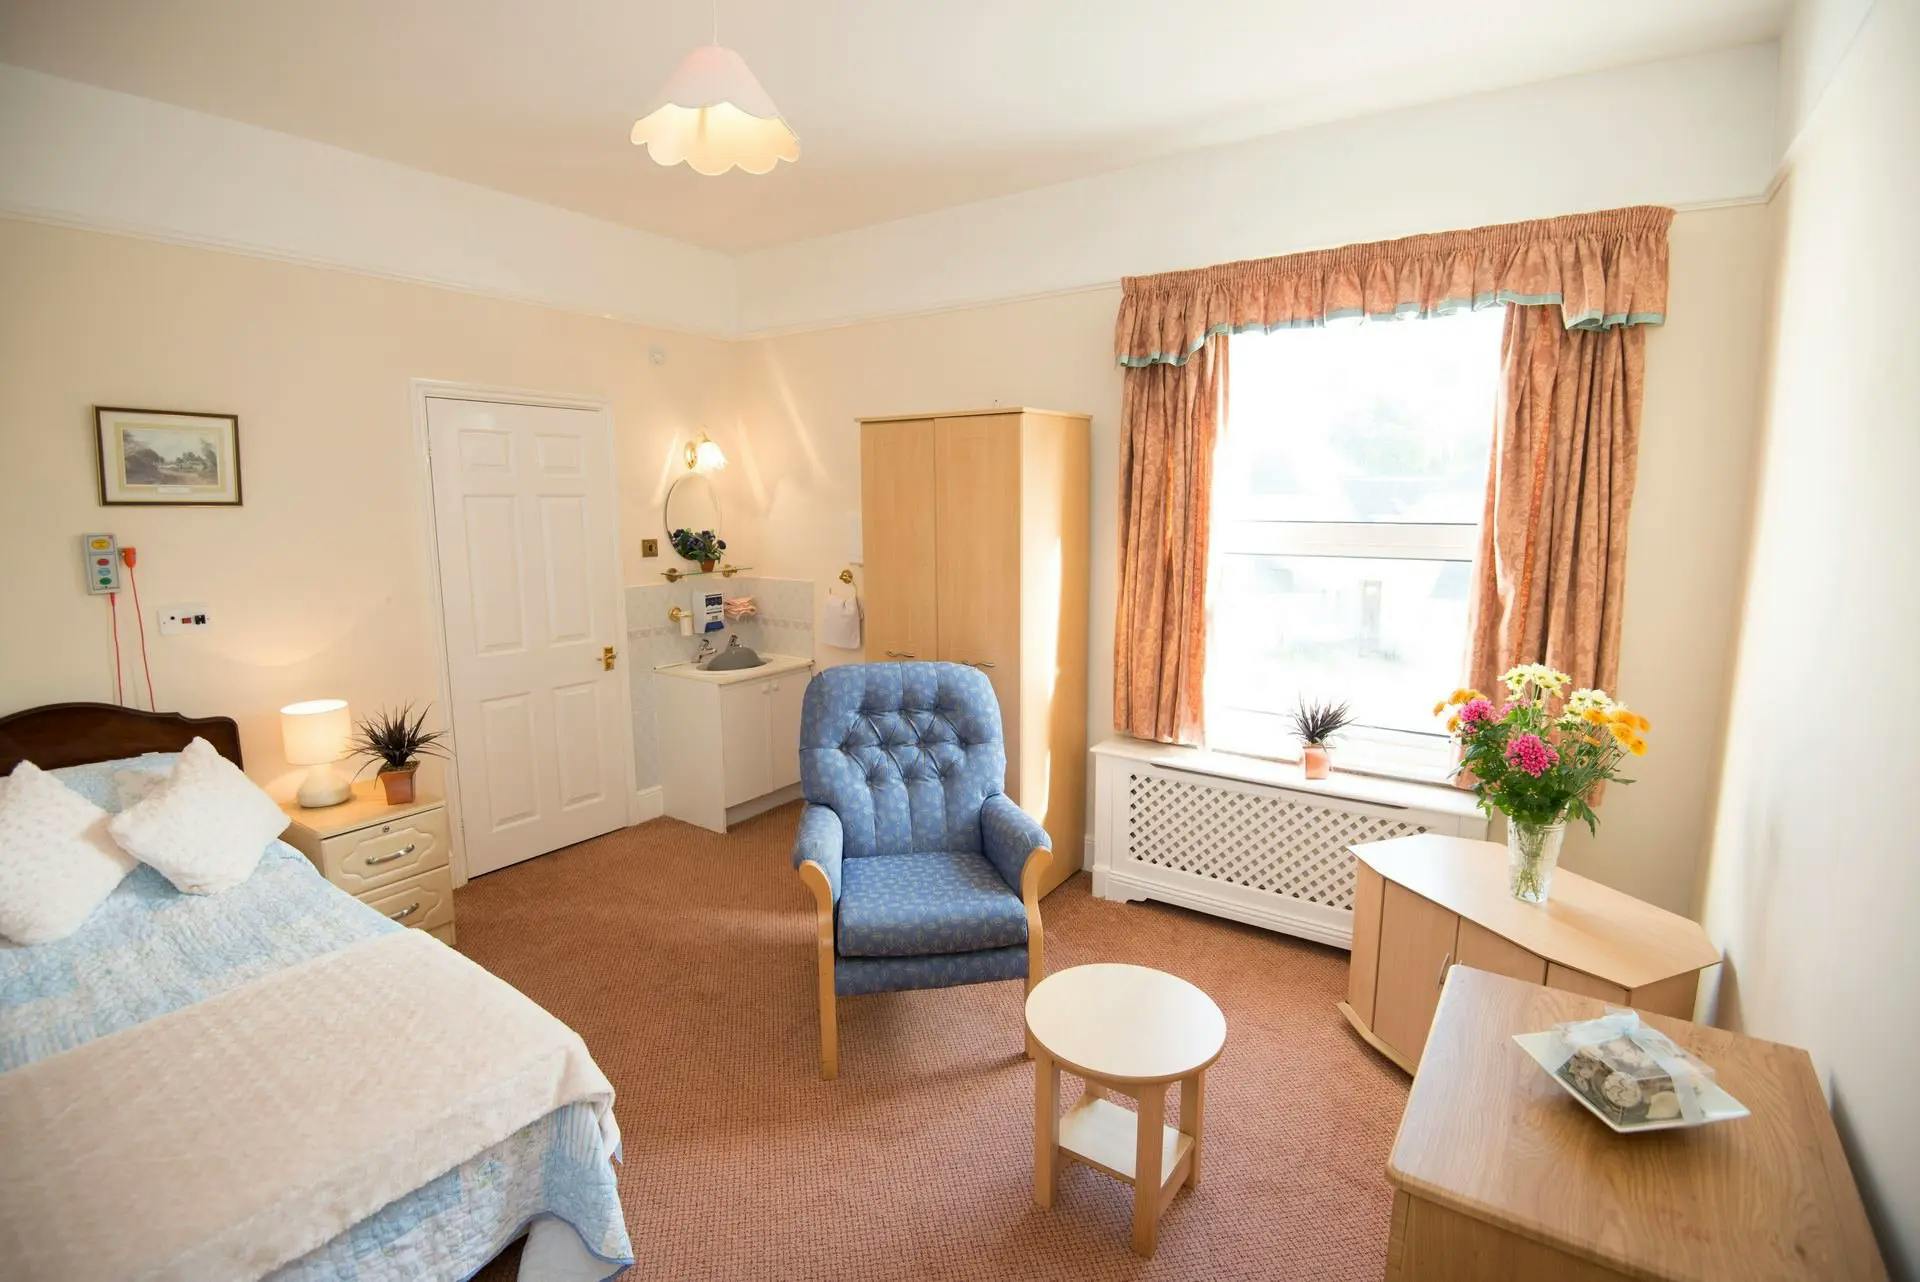 Bedroom at East Hill House Care Home in Liss, Hampshire